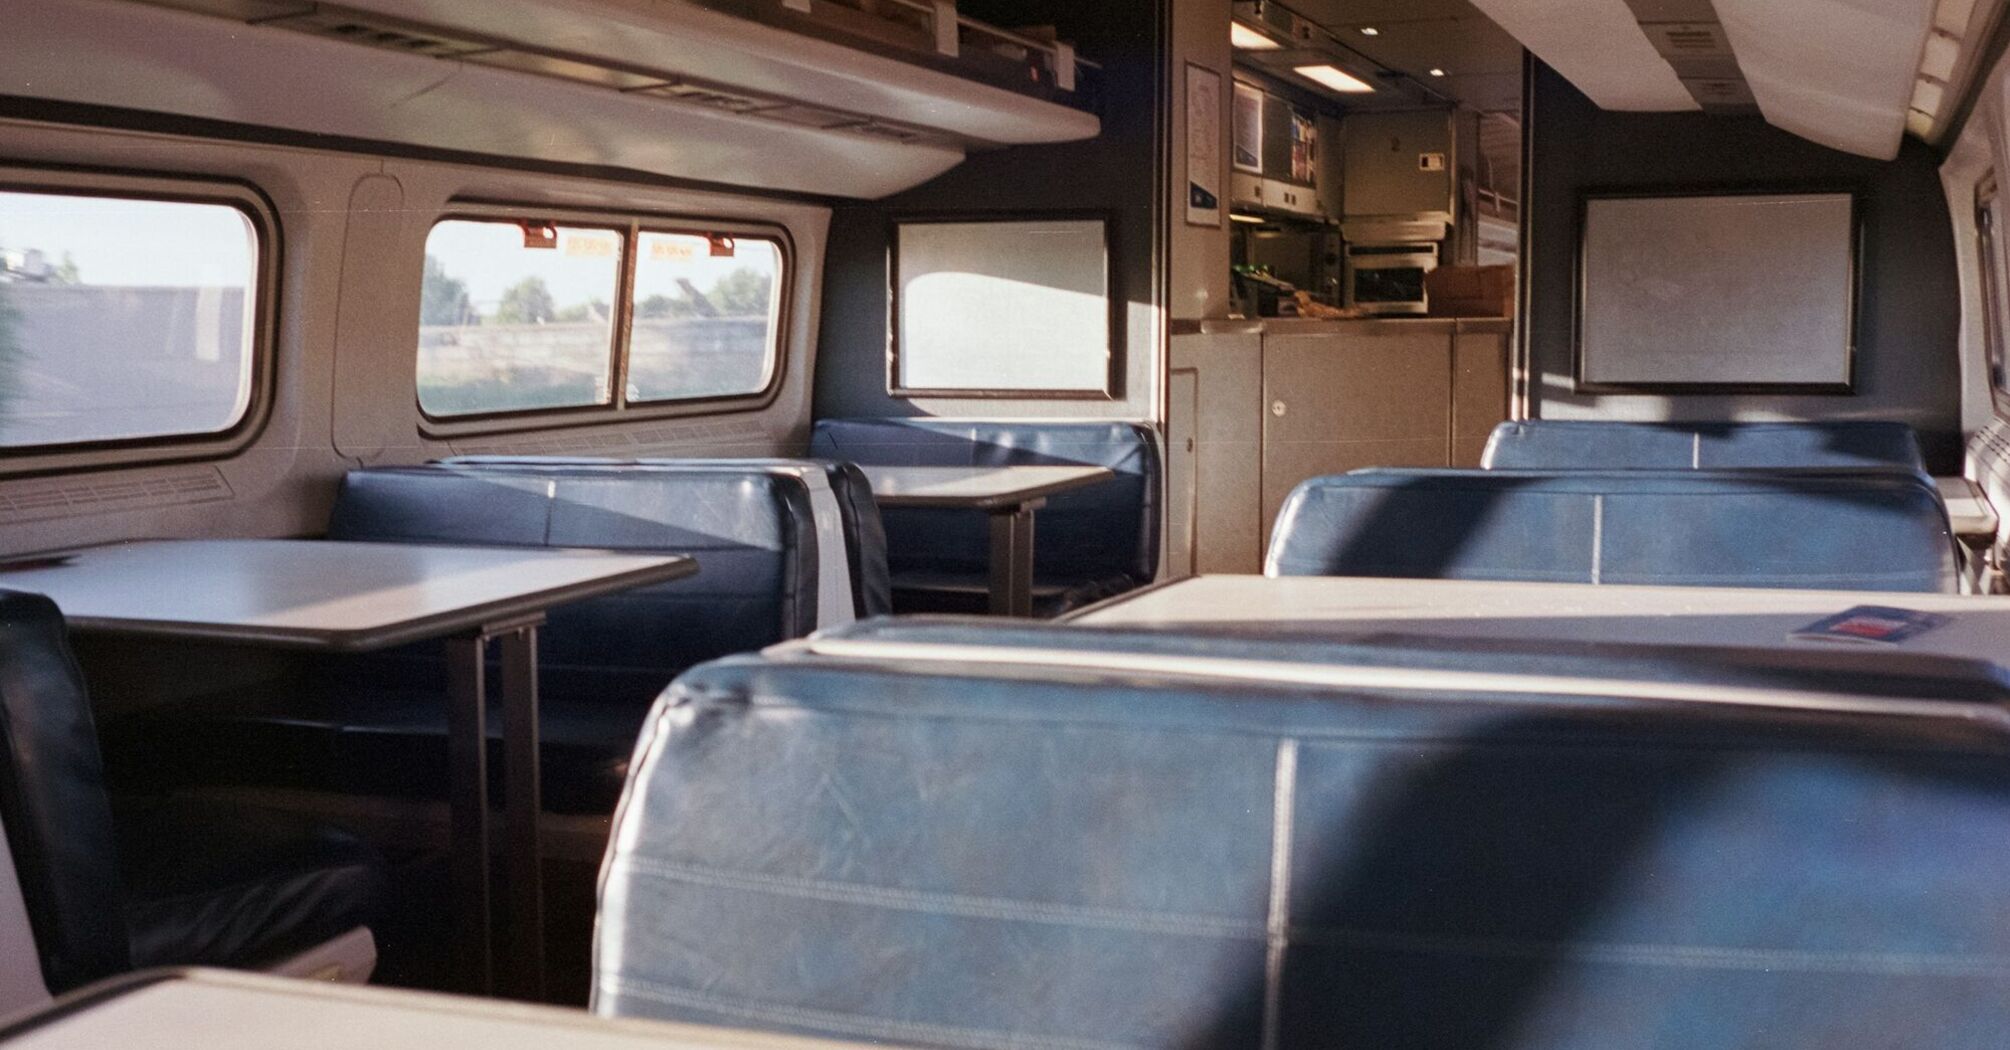 Interior of an Amtrak train showing empty blue seats and tables in the café car